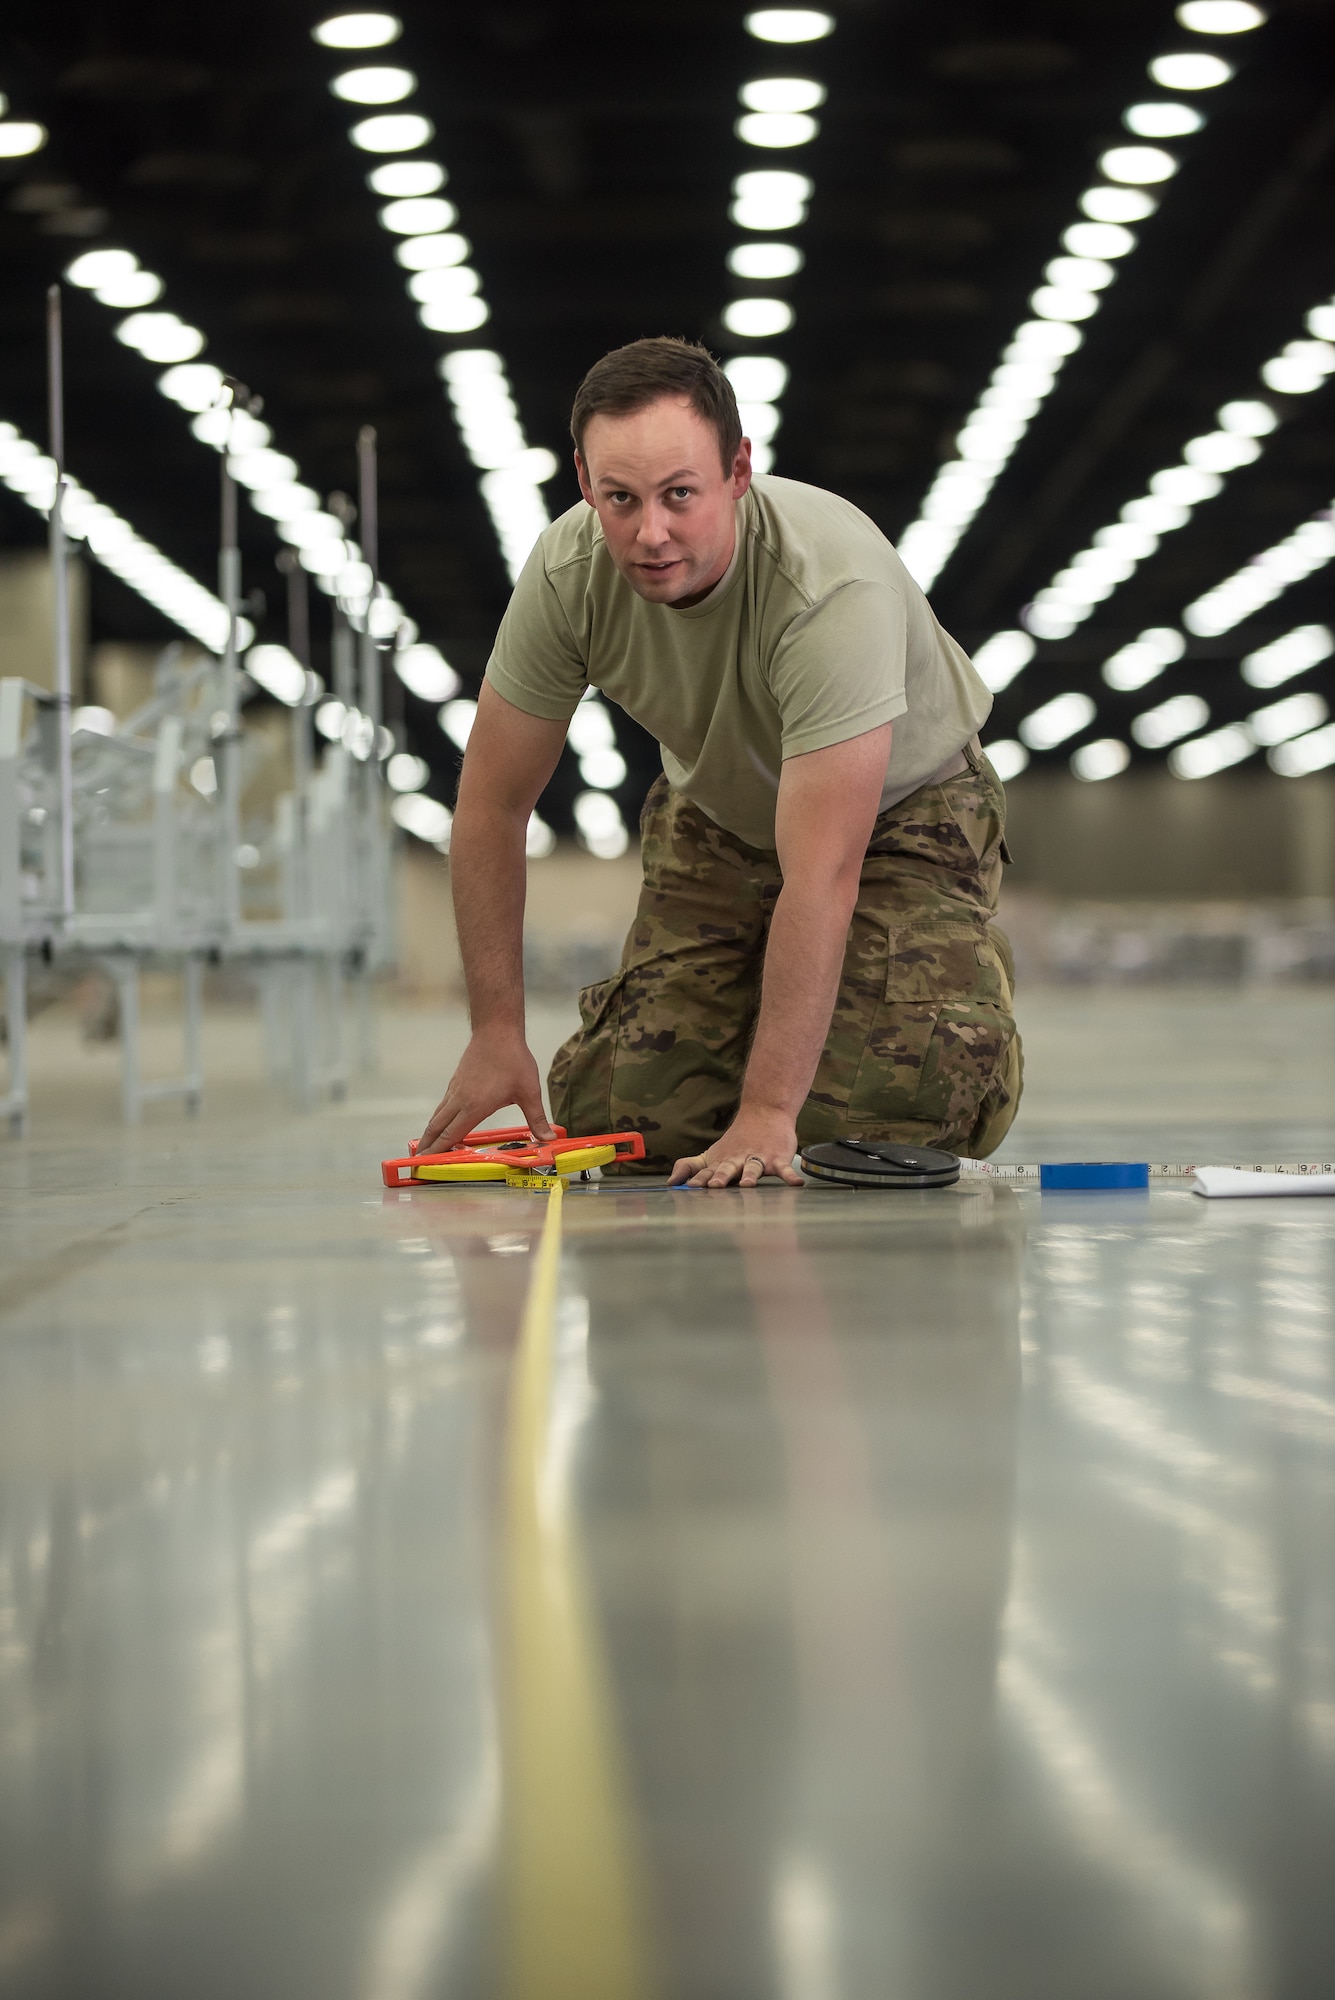 Staff Sgt. Wesley Hack of the Kentucky Air National Guard’s 123rd Civil Engineer Squadron measures floor space for hospital beds at the Kentucky Fair and Exposition Center in Louisville, Ky., April 11, 2020. The site, which is expected to be operational April 15, will serve as an Alternate Care Facility for patients suffering from COVID-19 if area hospitals exceed available capacity. The location initially can treat up to 288 patients and is scalable to 2,000 beds. (U.S. Air National Guard photo by Dale Greer)